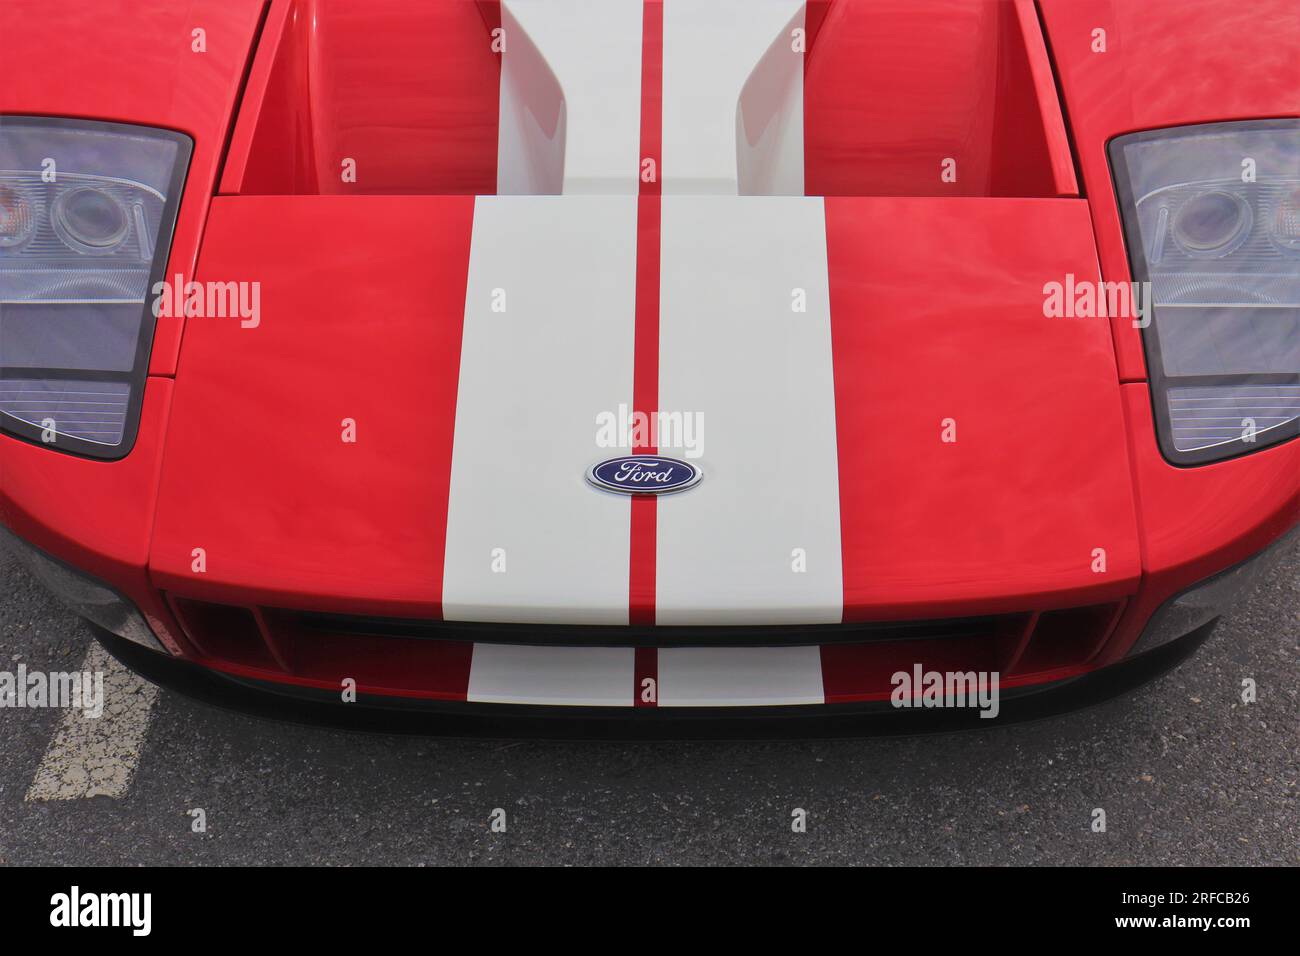 Red & white Ford GT 2005 parked in a parking lot. Stock Photo